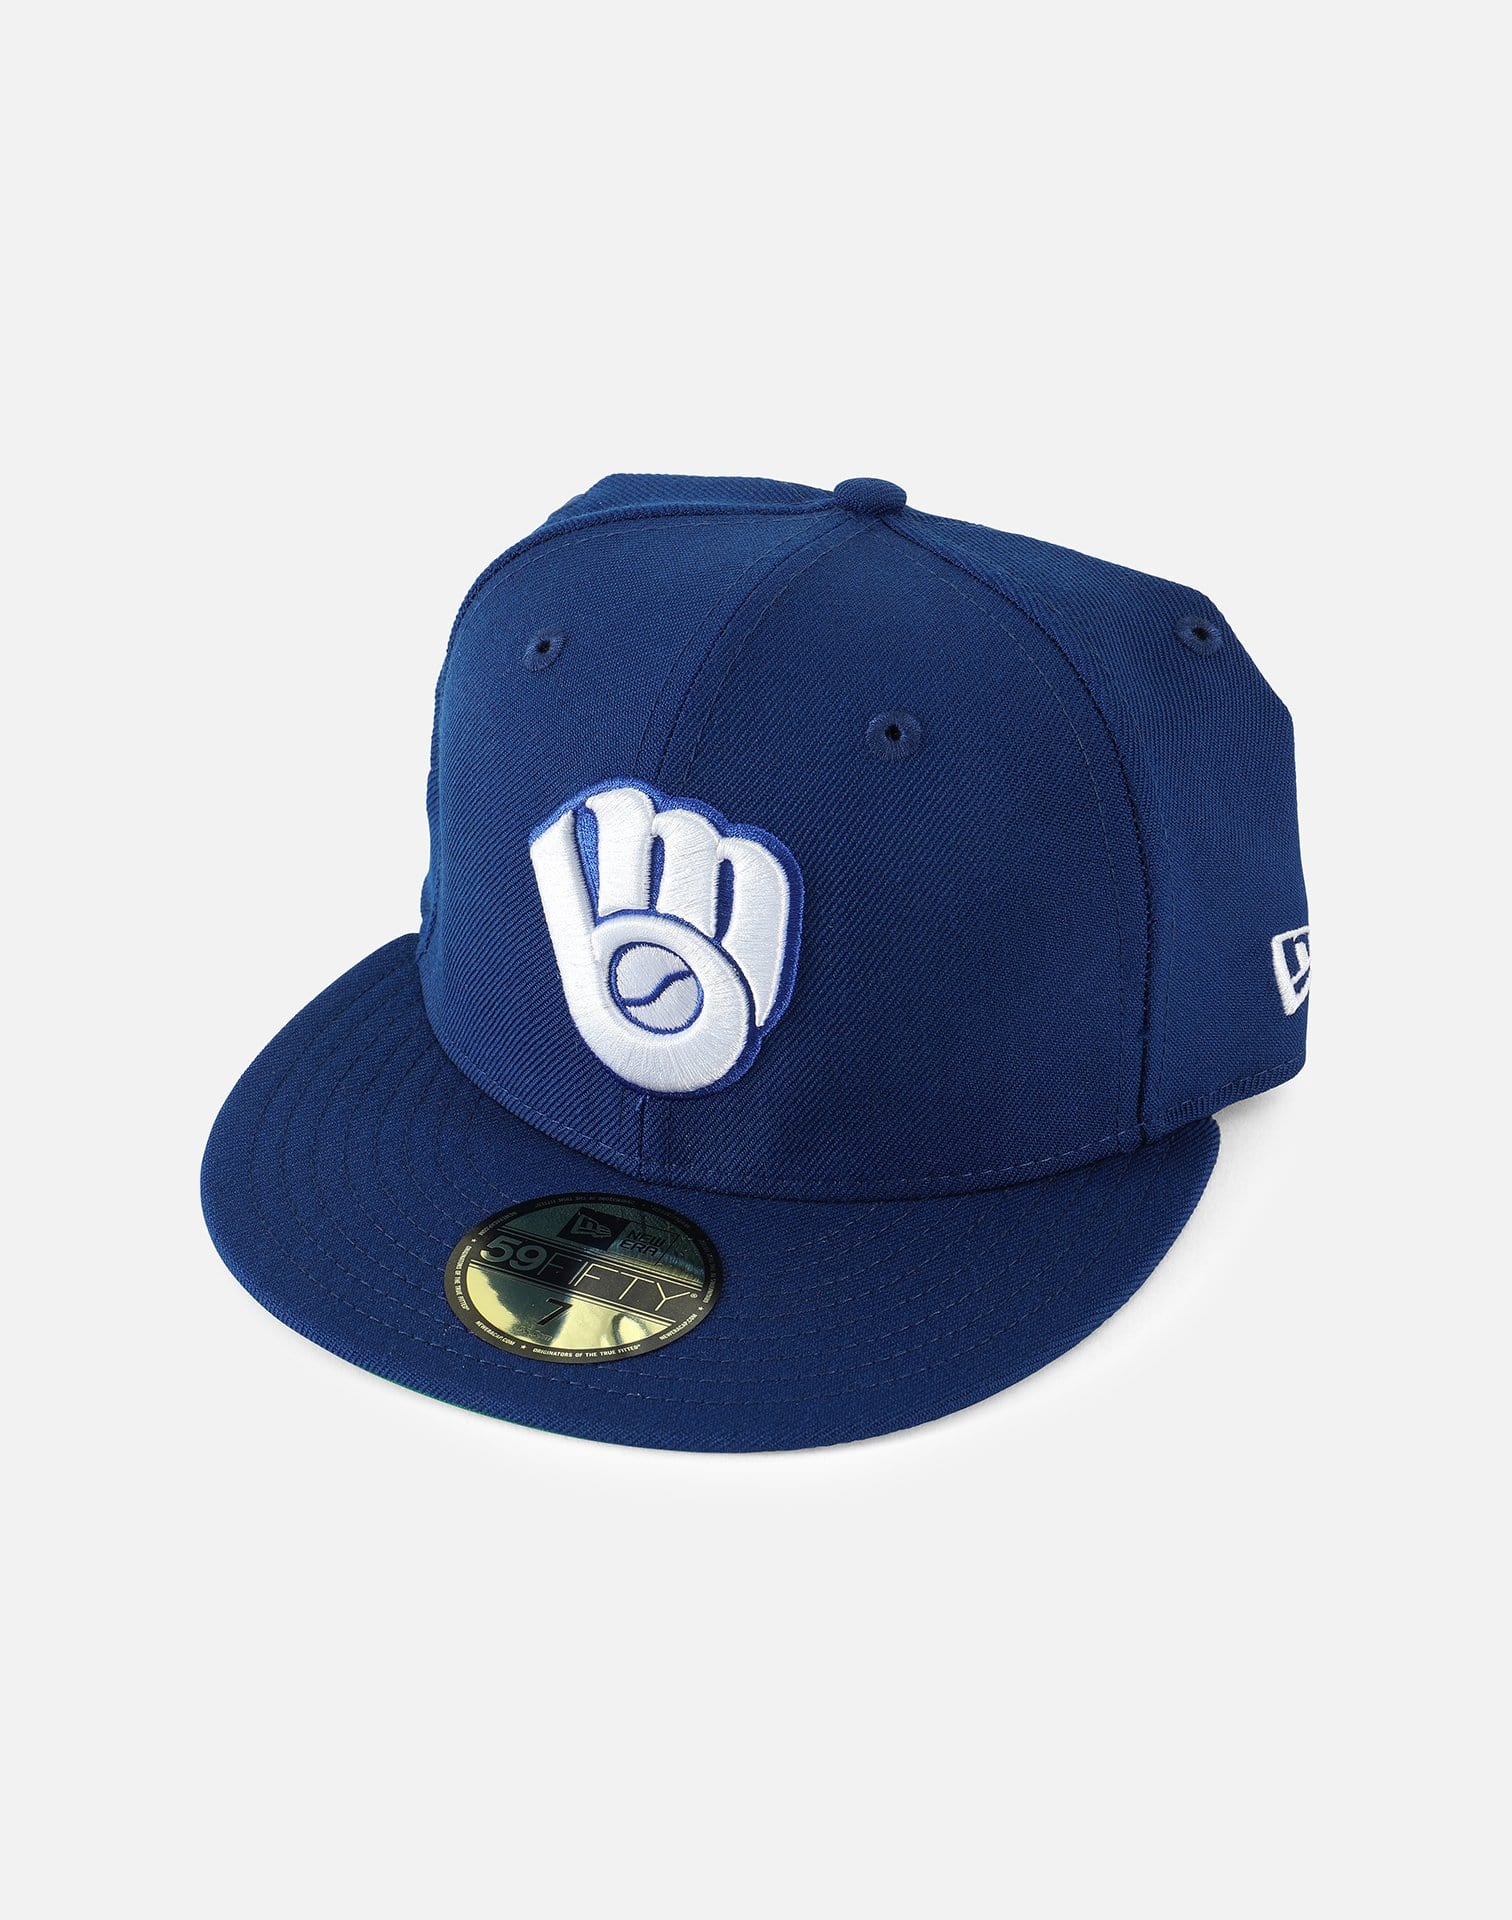 New Era 5950 MLB MILWAUKEE BREWERS FITTED HAT